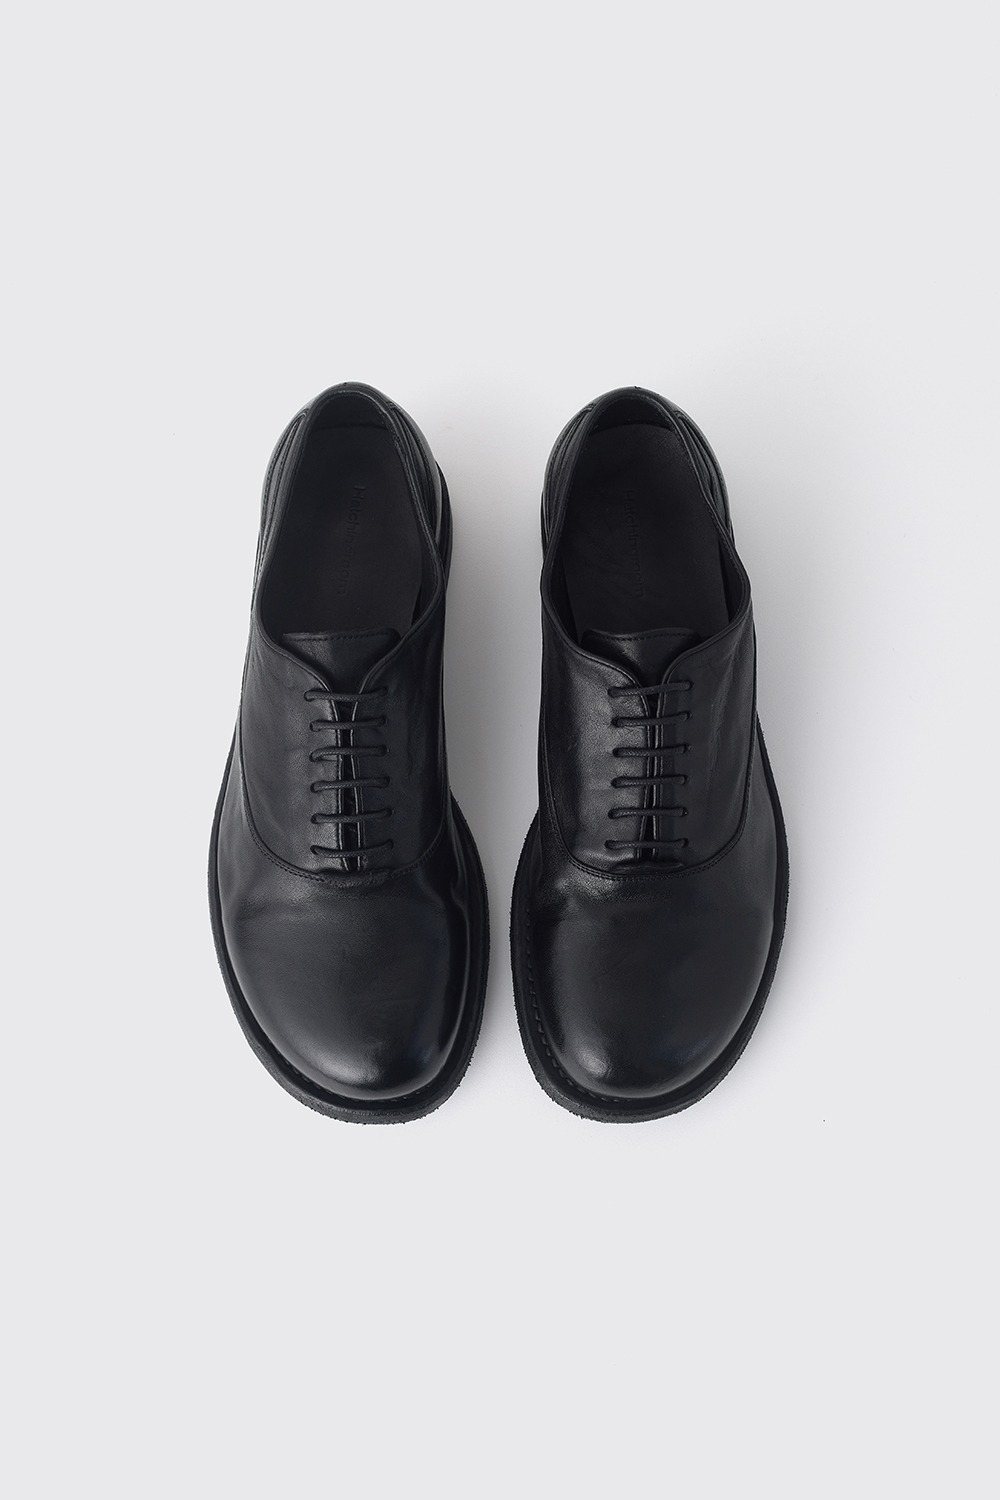 00 Oxford Shoes (4th Restock)